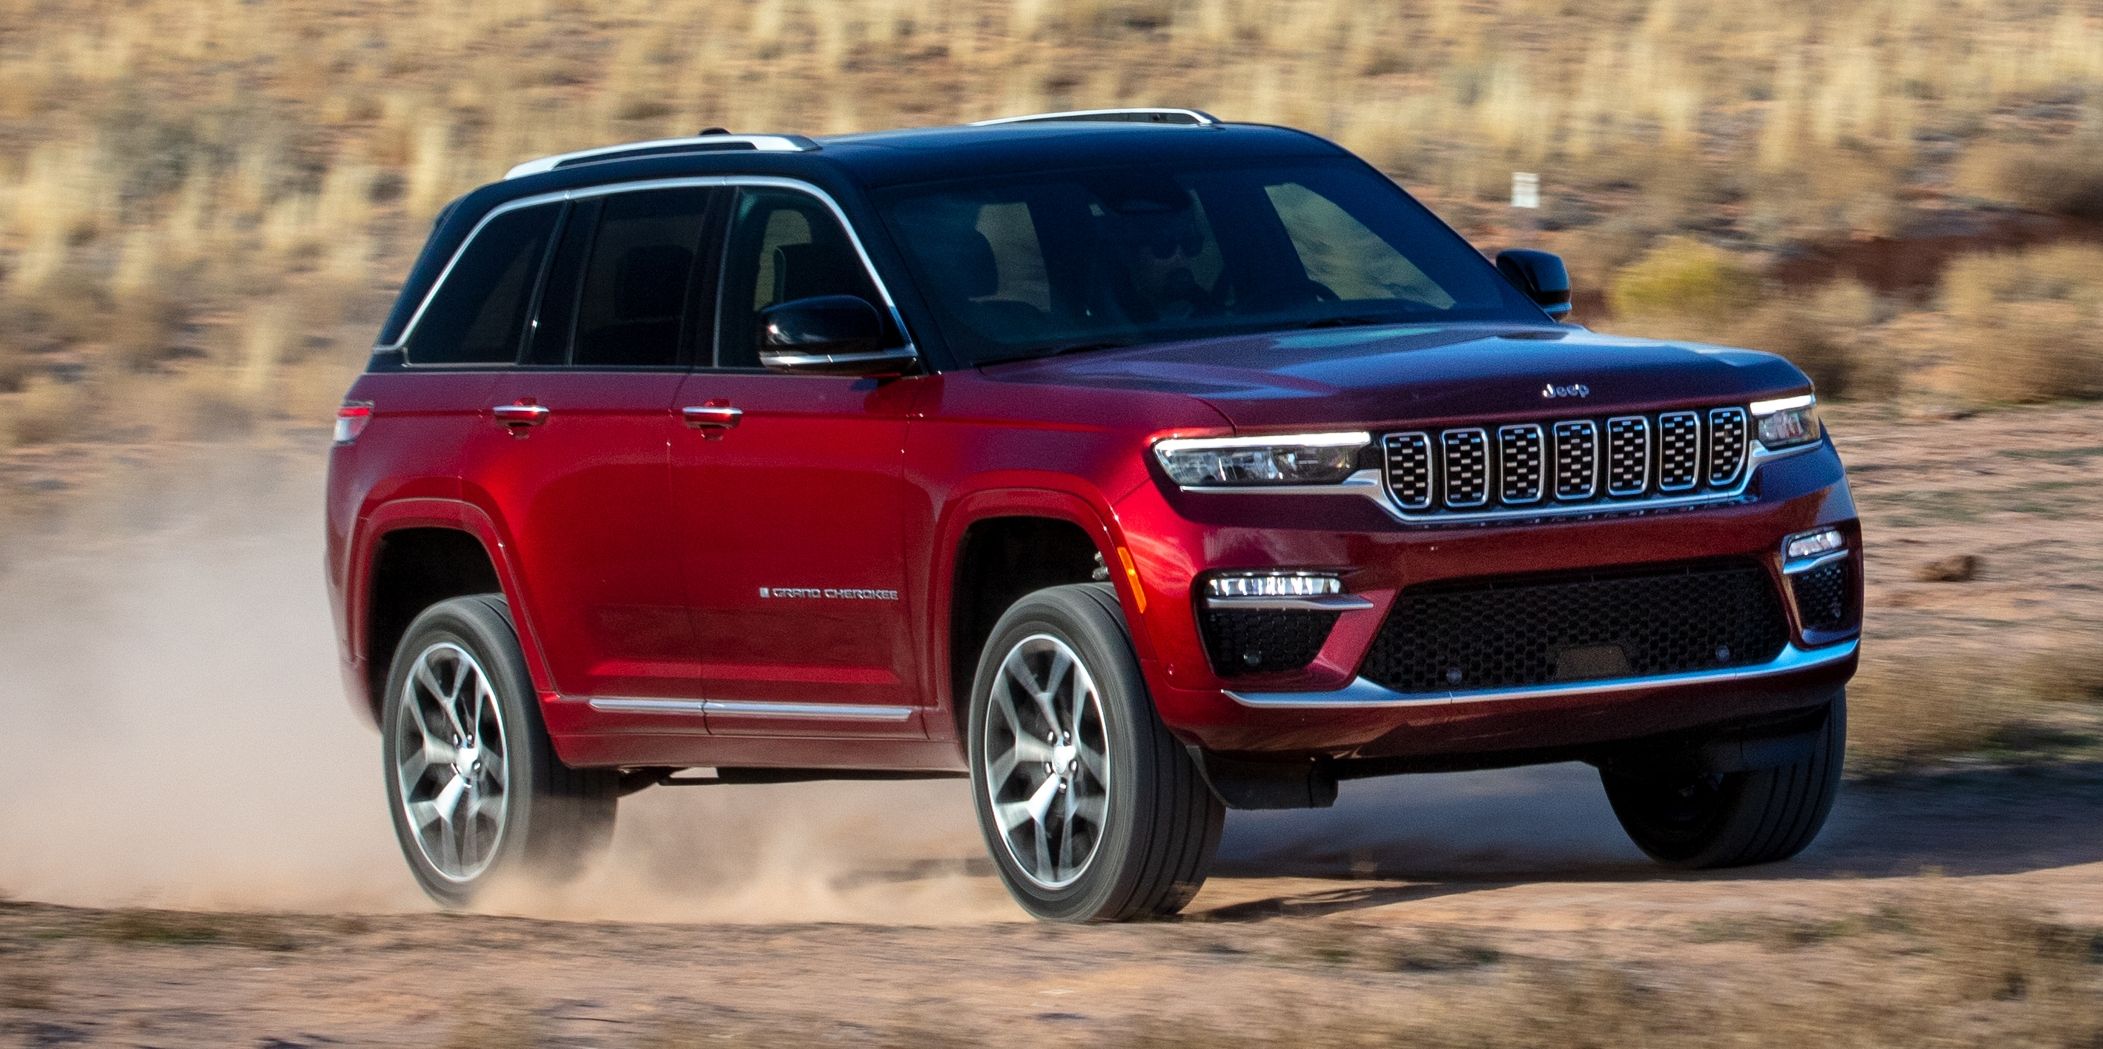 Jeep Quietly Kills Off V-8 Engine Option in Two-Row Grand Cherokee